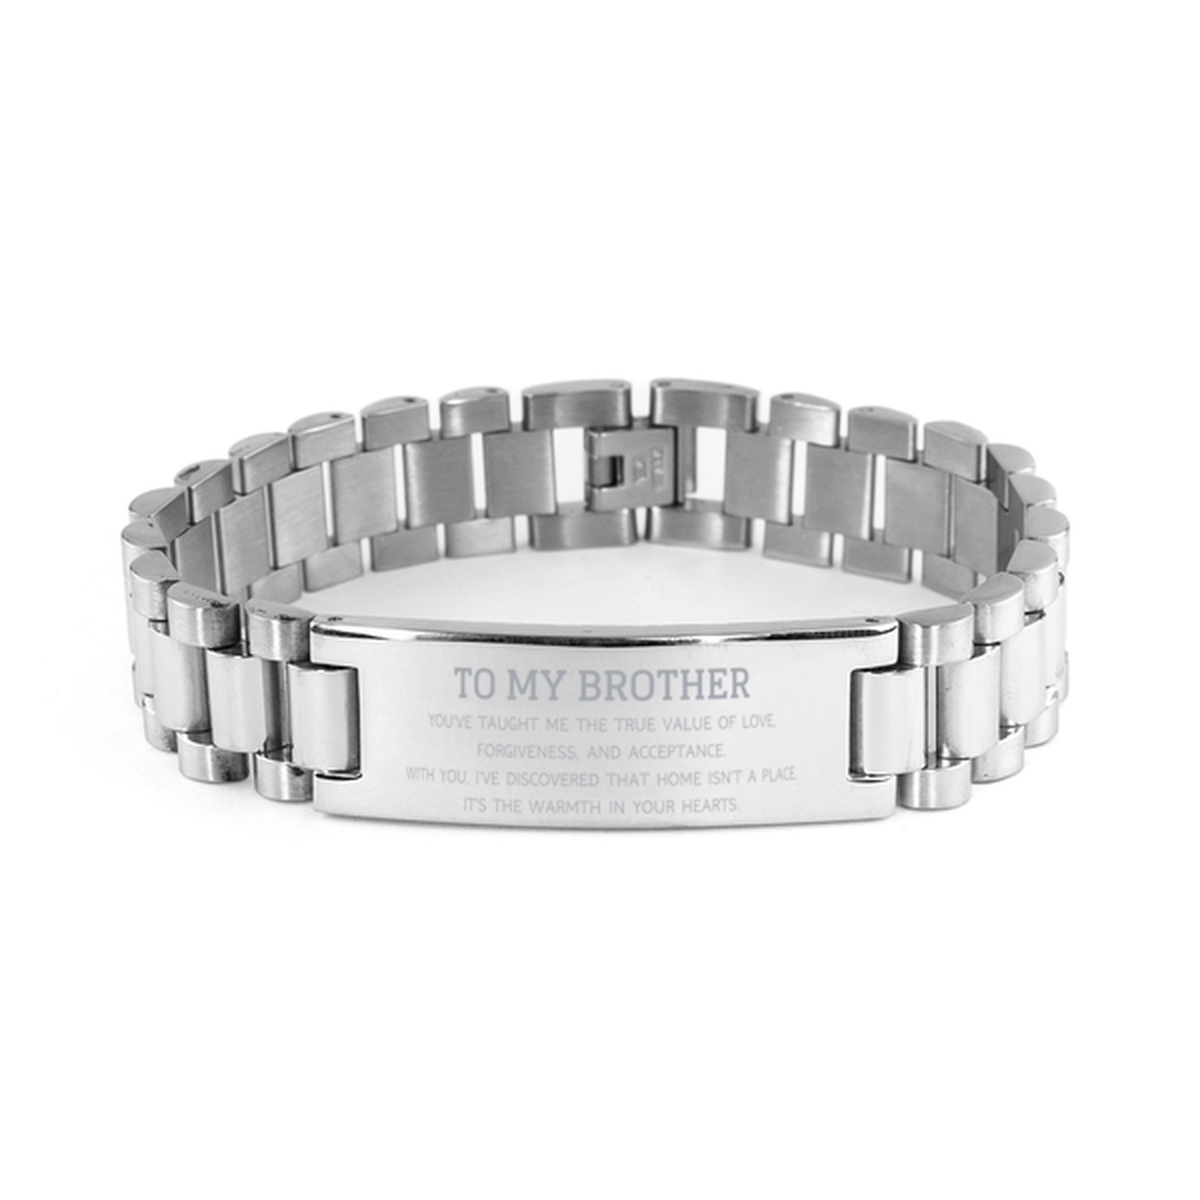 To My Brother Gifts, You've taught me the true value of love, Thank You Gifts For Brother, Birthday Ladder Stainless Steel Bracelet For Brother